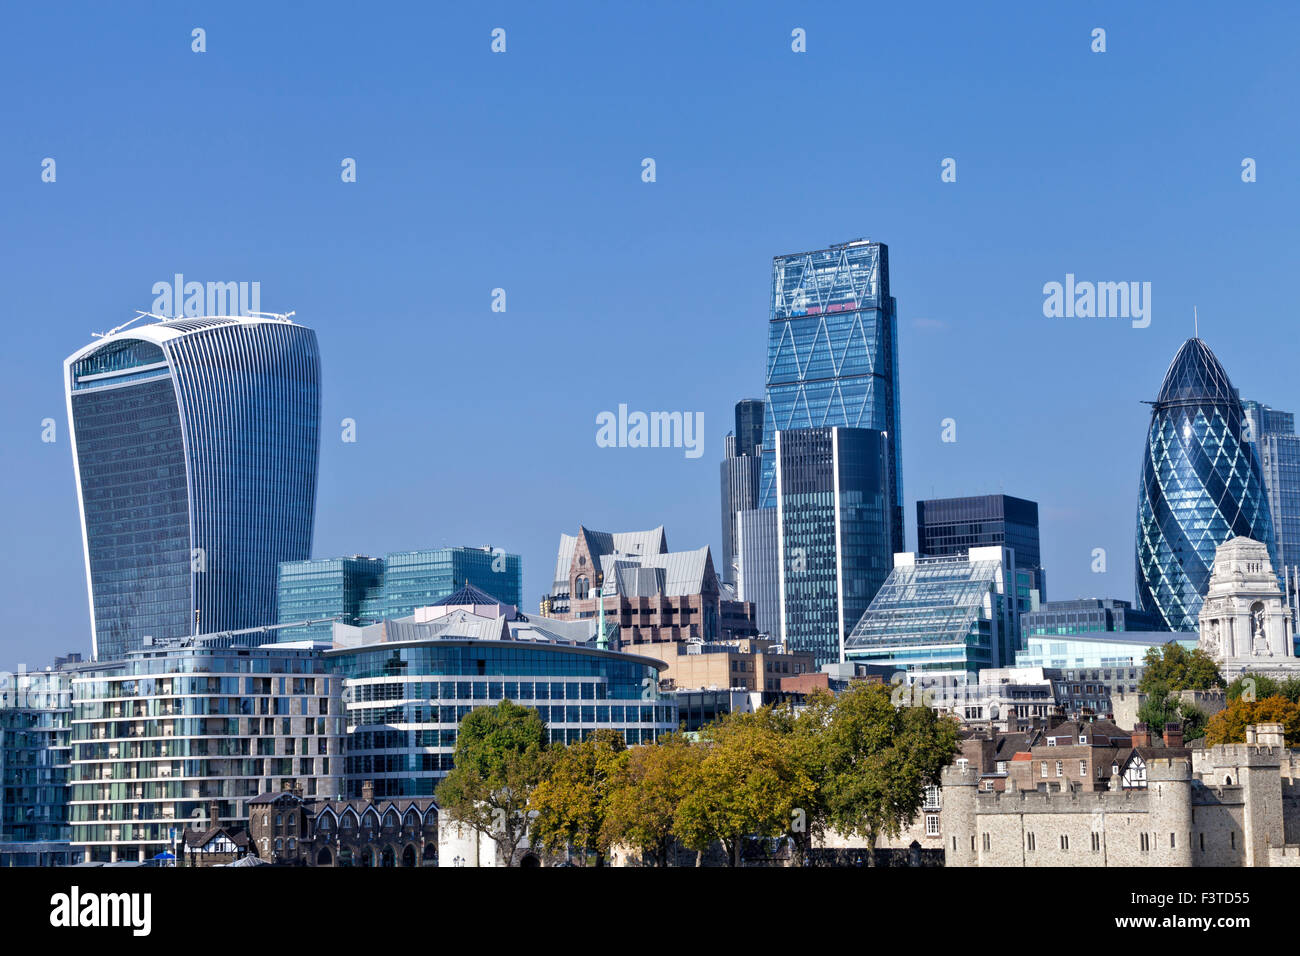 Autumn cityscape of London famous skyscrapers in the insurance sector Stock Photo